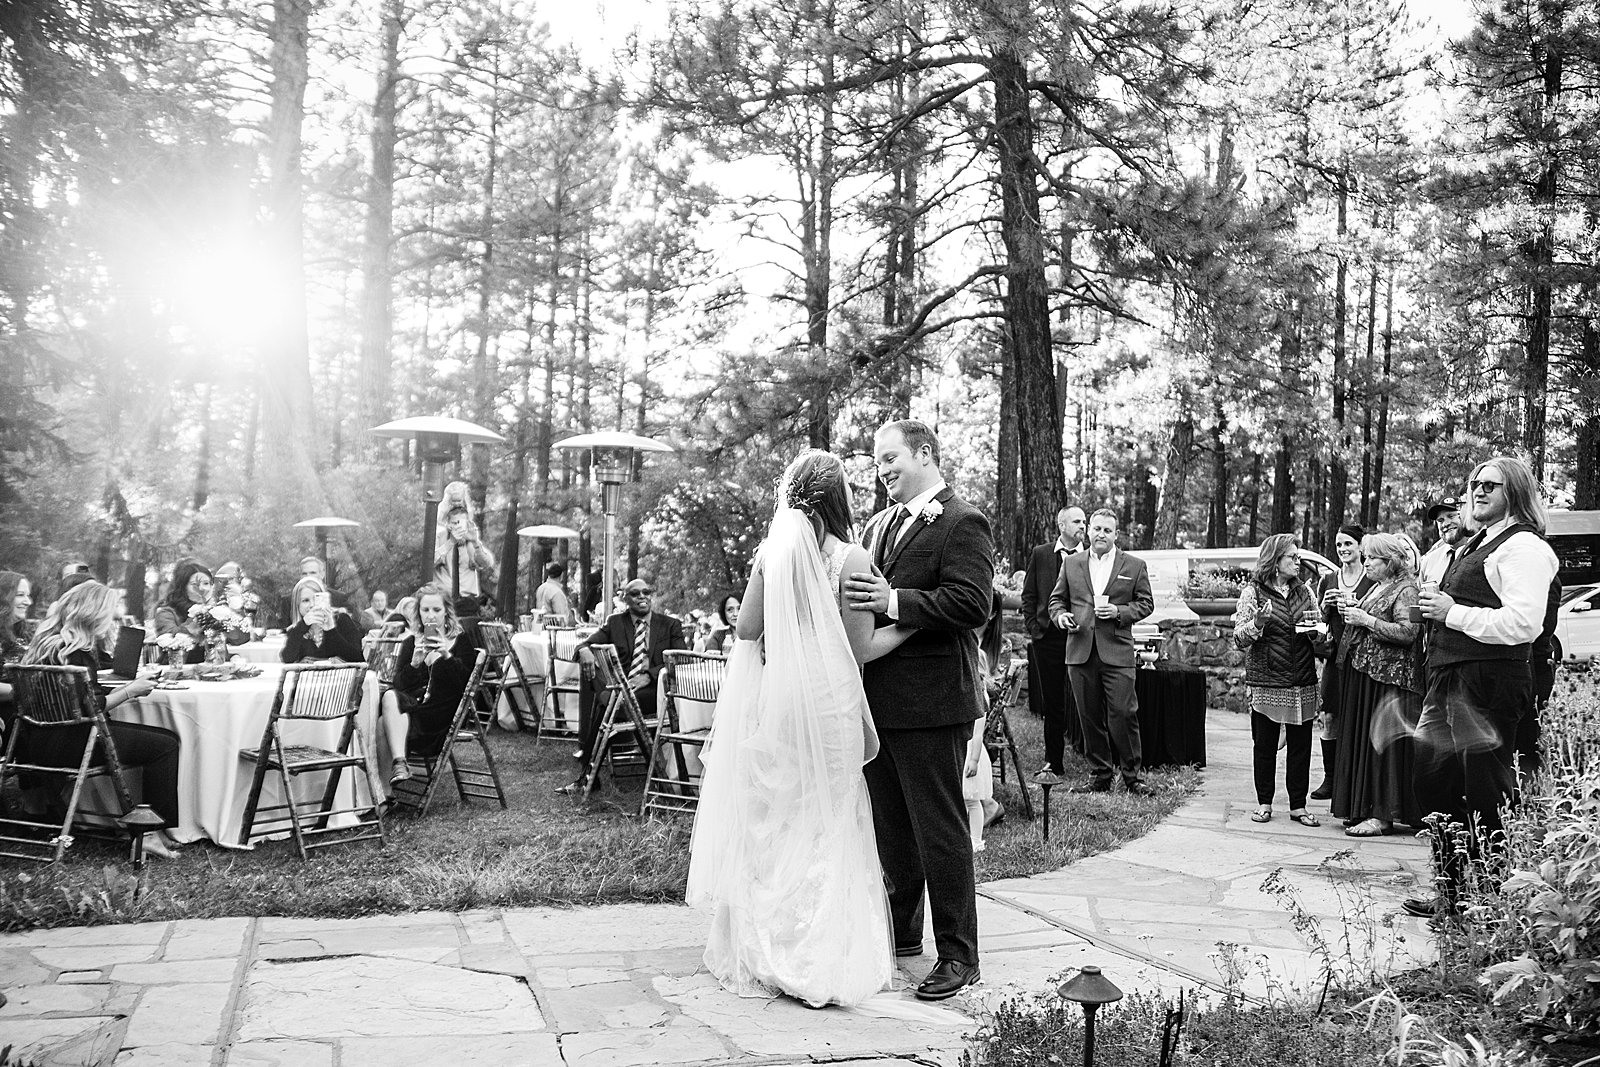 Bride and Groom sharing first dance at their The Colton House wedding reception by Arizona wedding photographer PMA Photography.